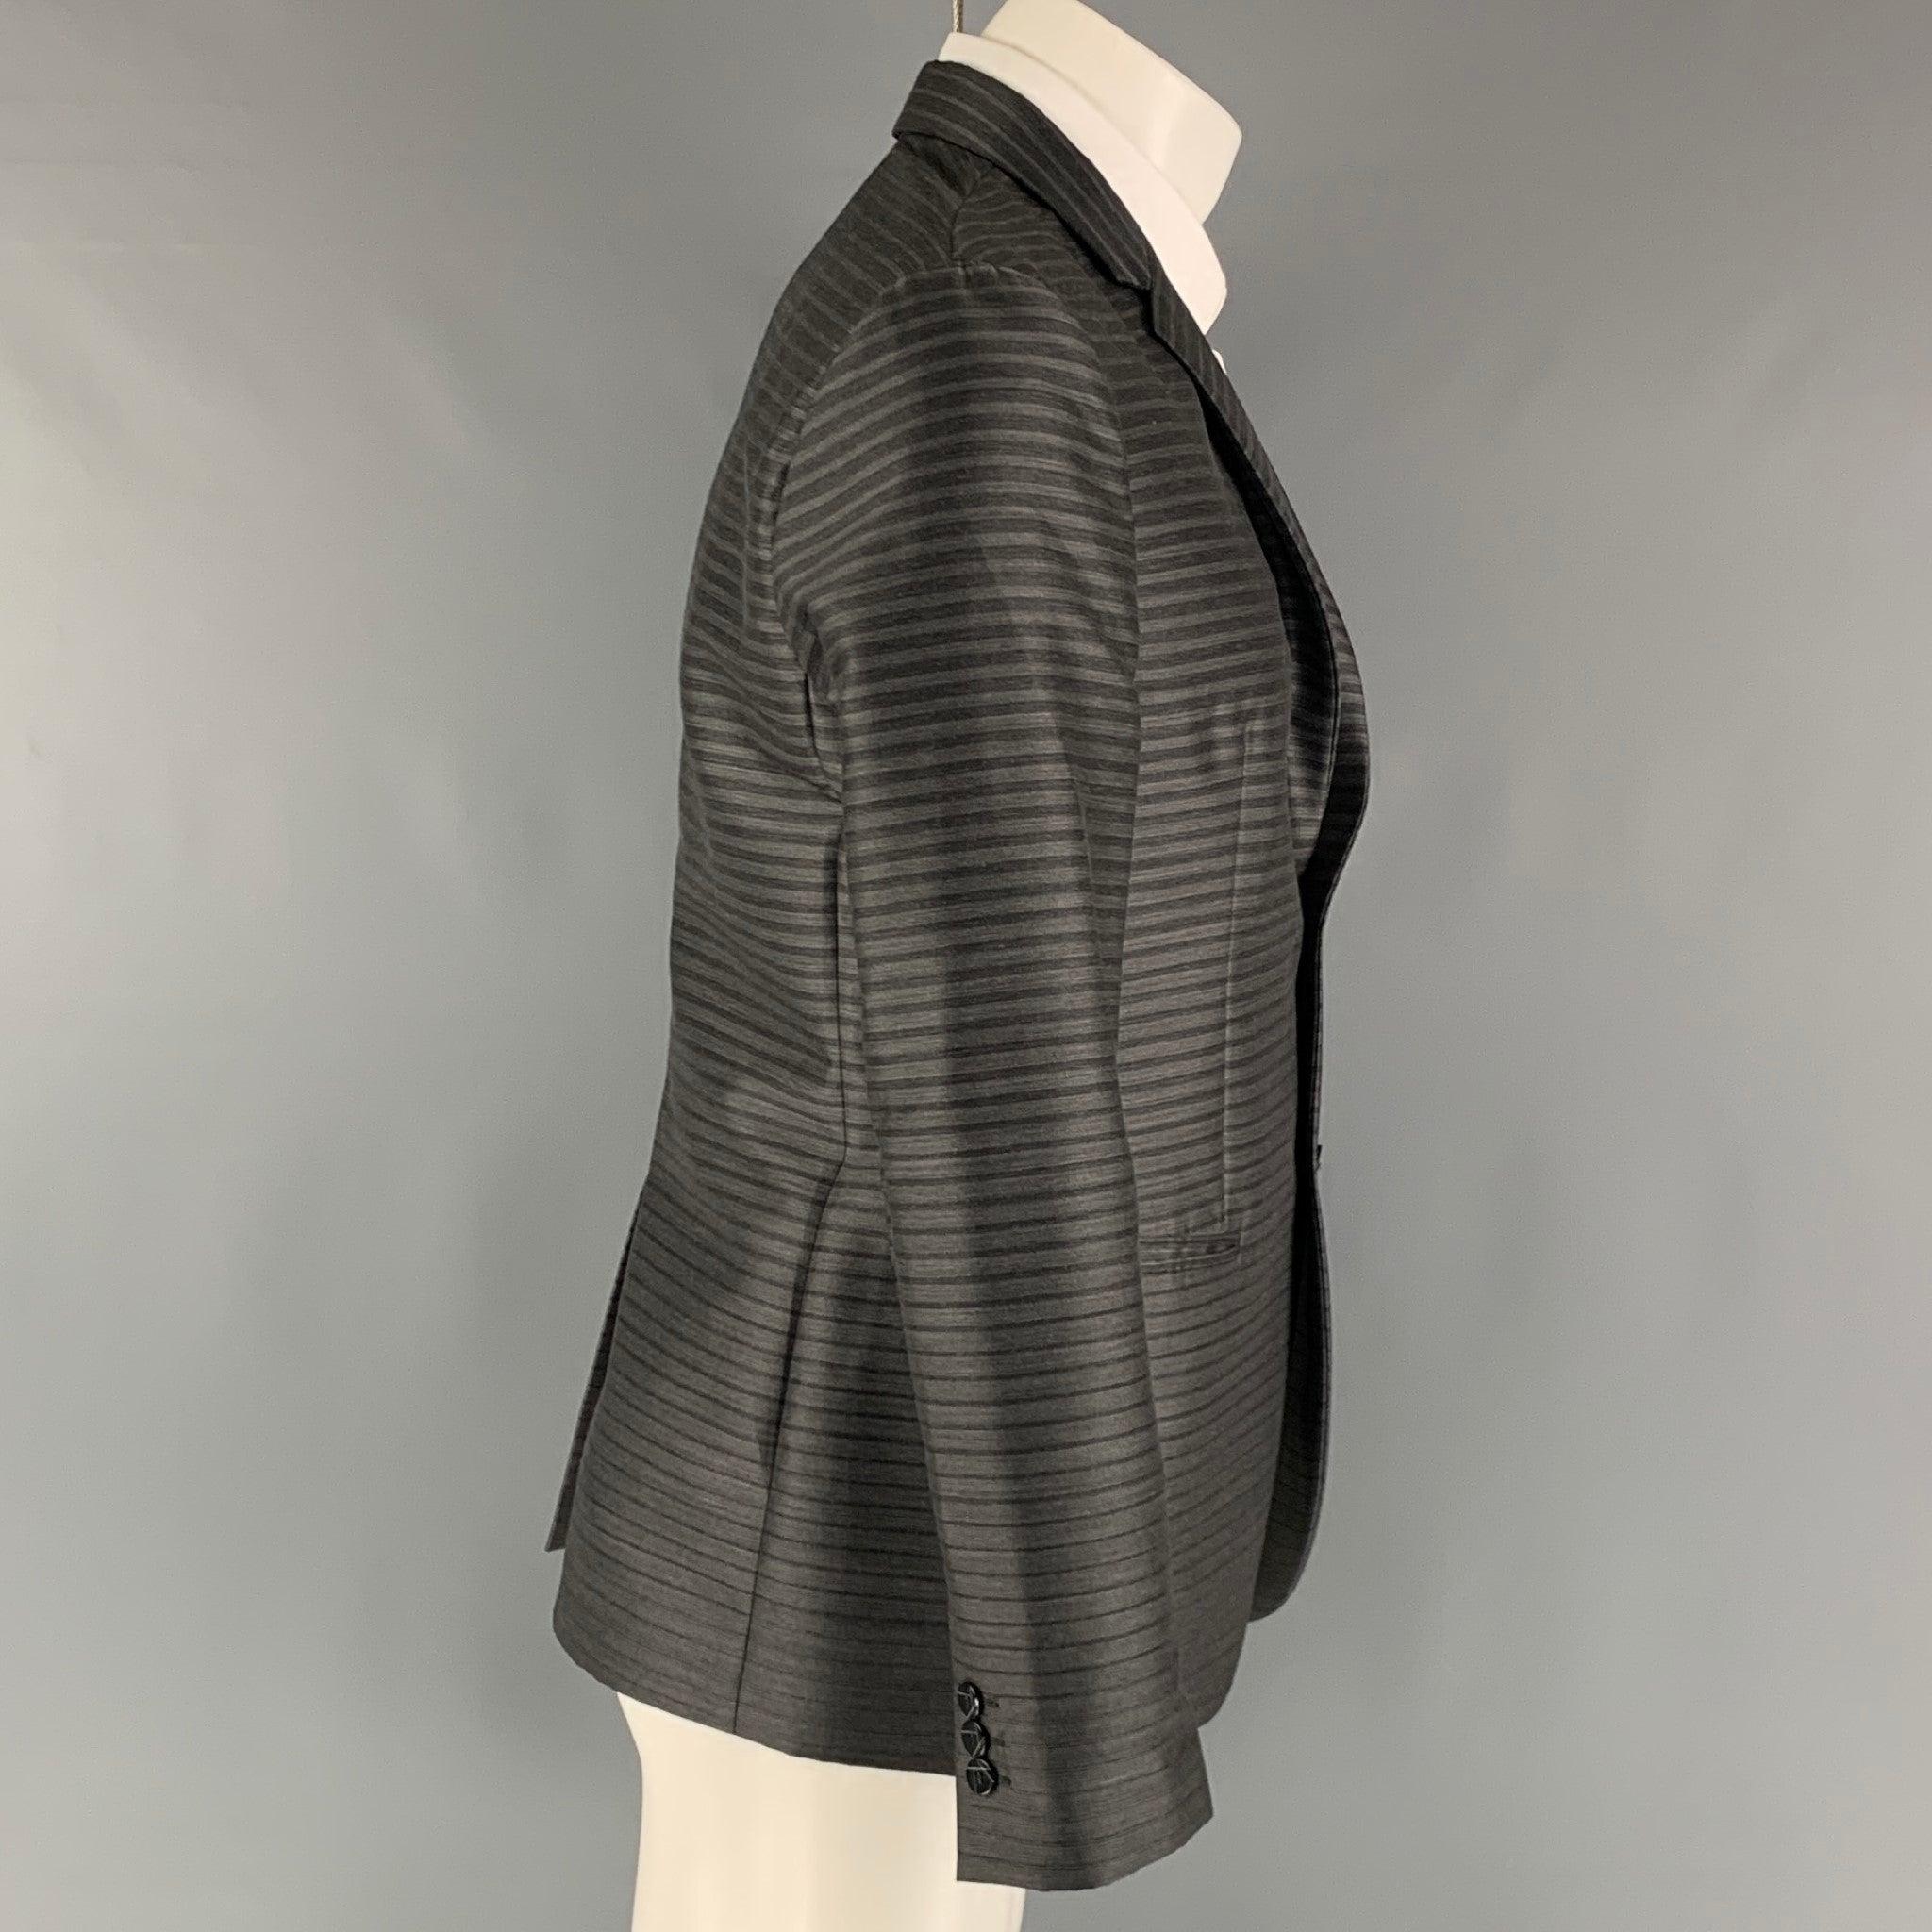 EMPORIO ARMANI sport coat comes in a grey and charcoal stripped wool blend woven material full liner featuring a notch lapel, welt pockets, single back vent, and a two button closure. Made in Italy. Excellent Pre-Owned Condition. 

Marked:   48